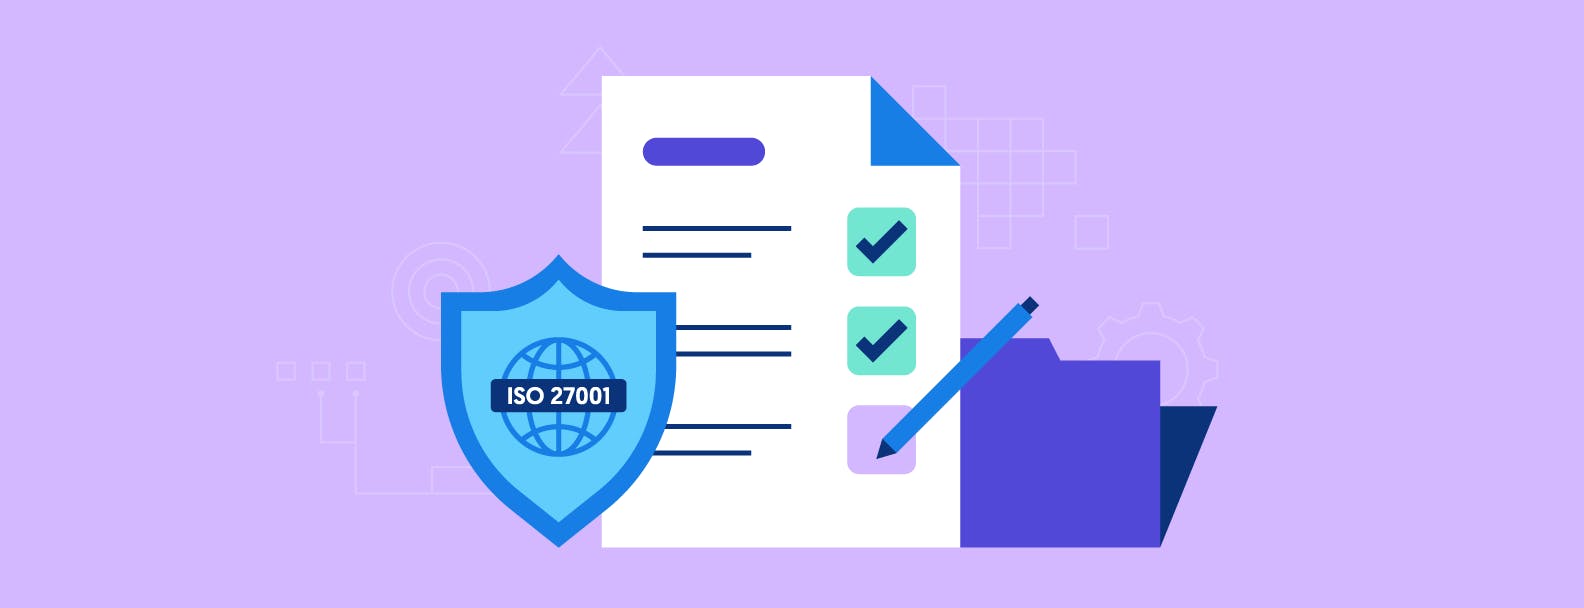 ISO 27001 Checklist: Your 14-Step Roadmap for Becoming ISO Certified